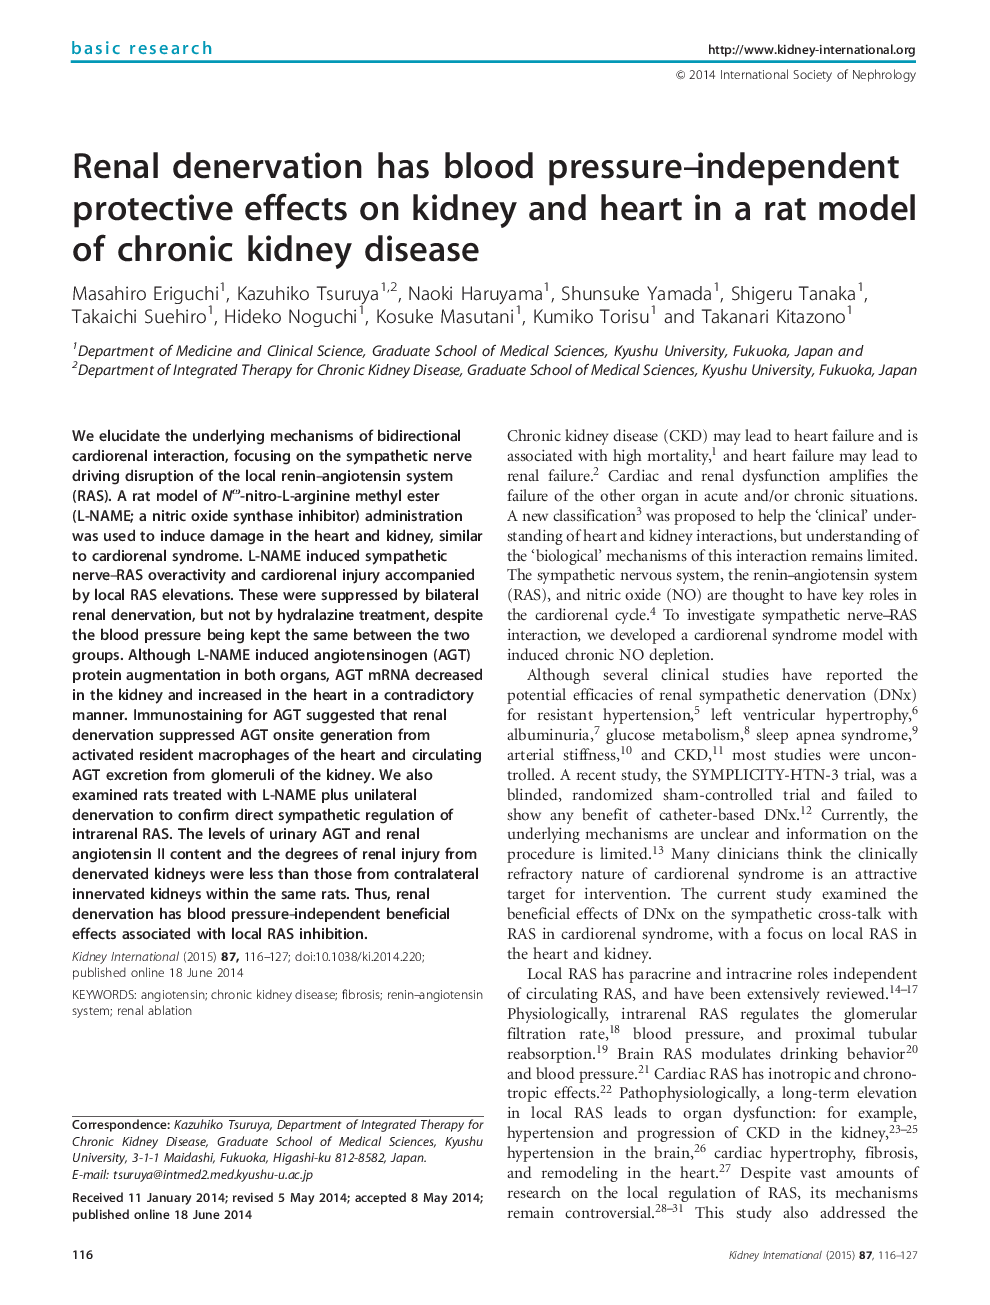 Renal denervation has blood pressure-independent protective effects on kidney and heart in a rat model of chronic kidney disease